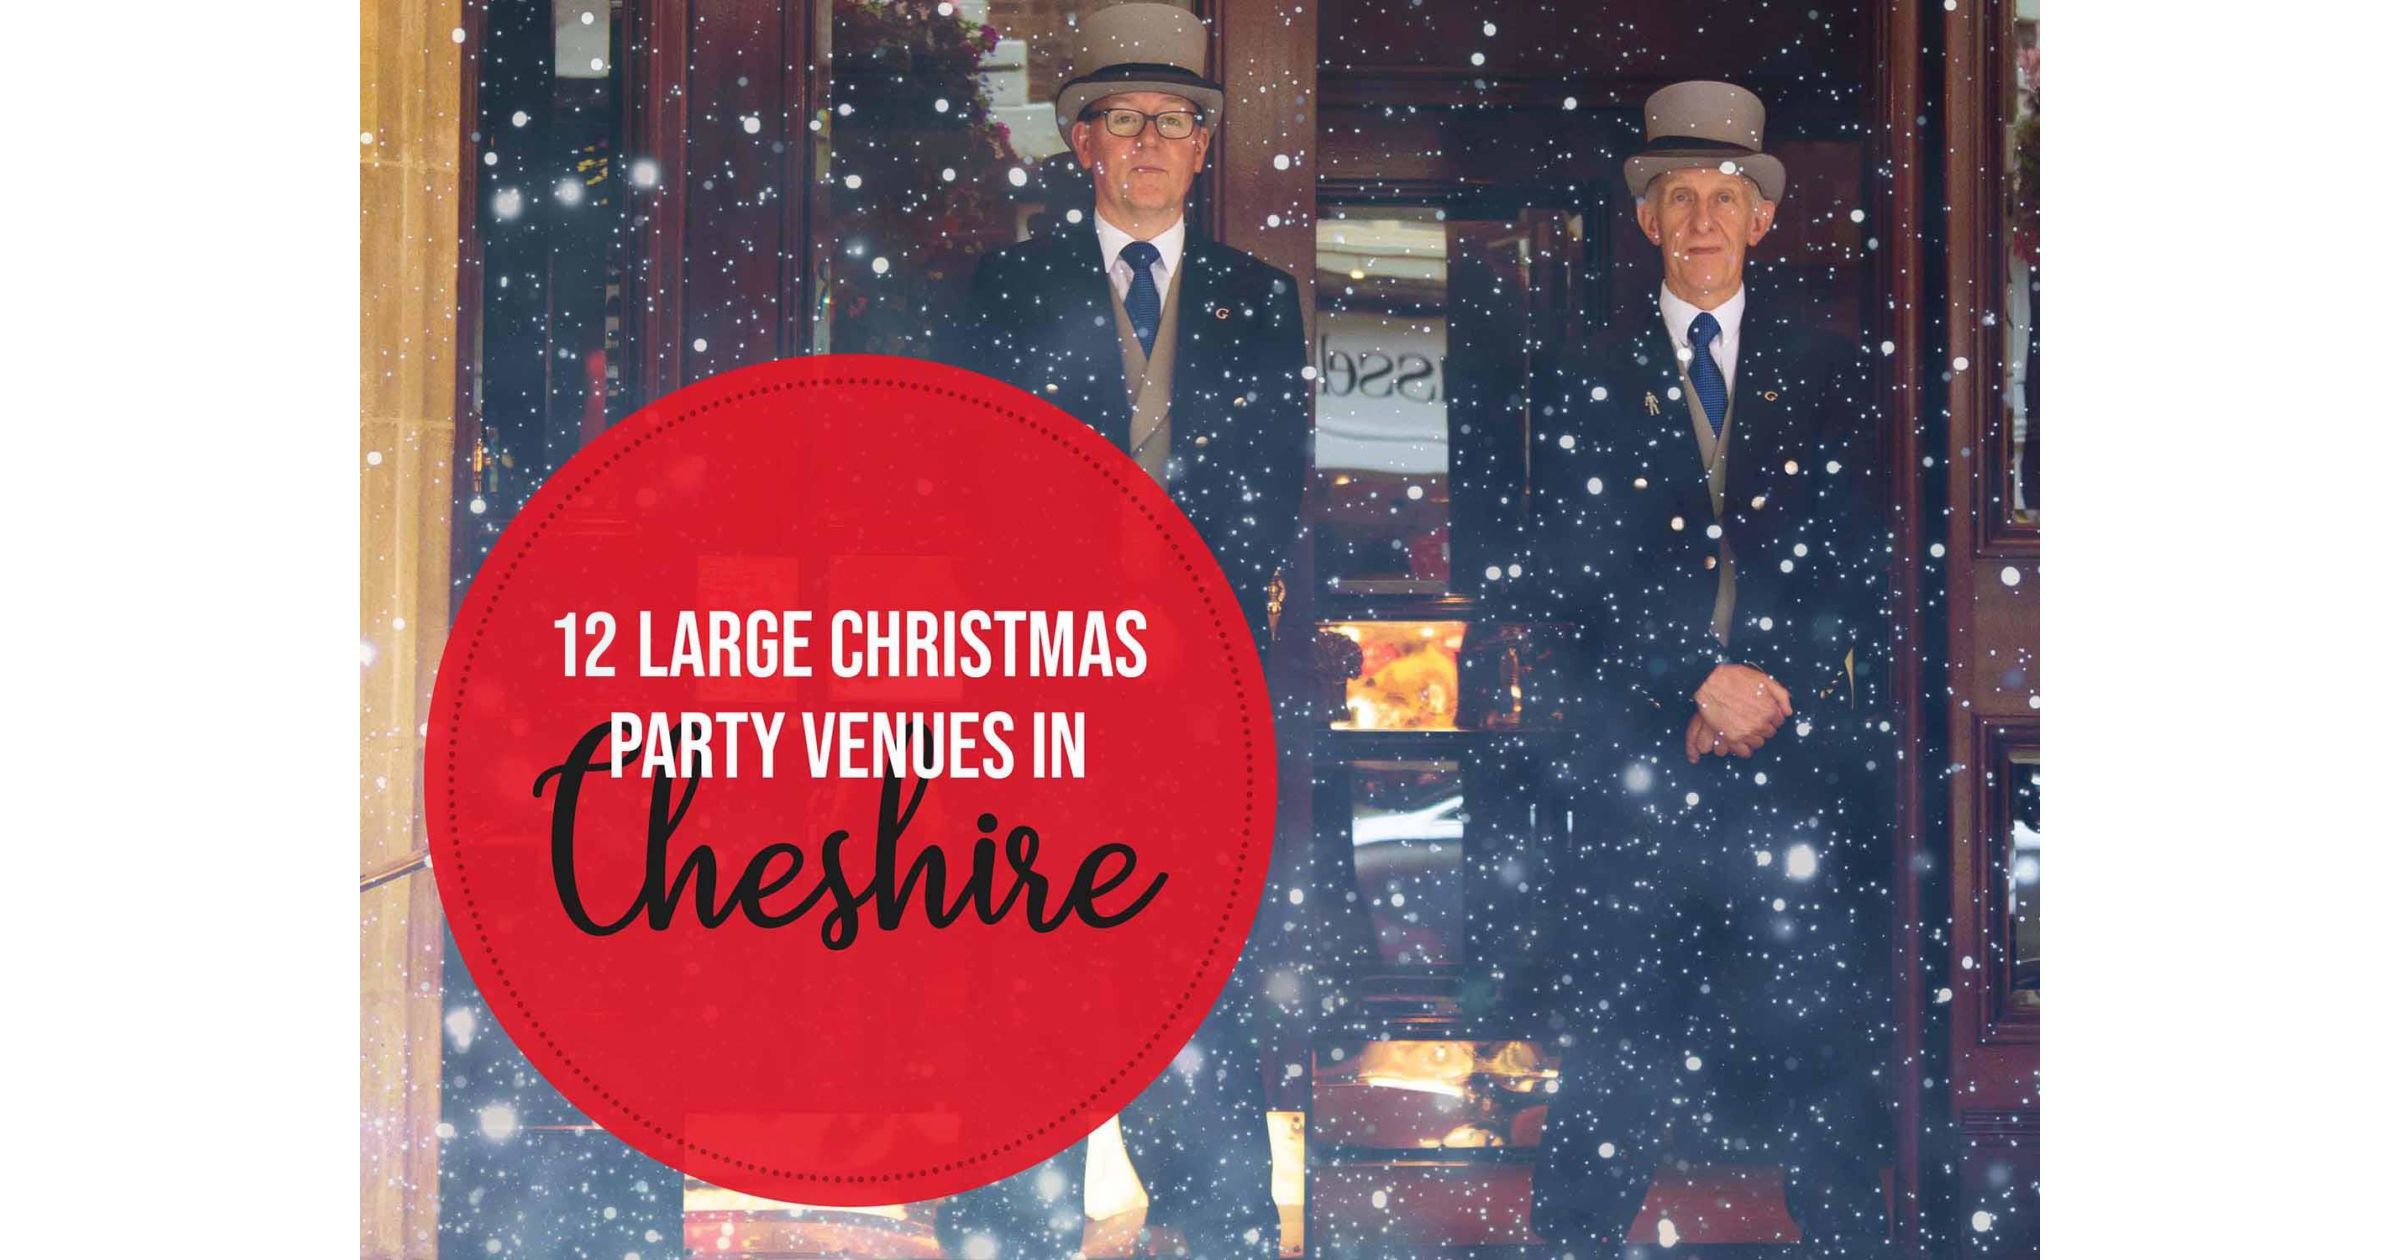 10 Large Christmas Party Venues in Cheshire